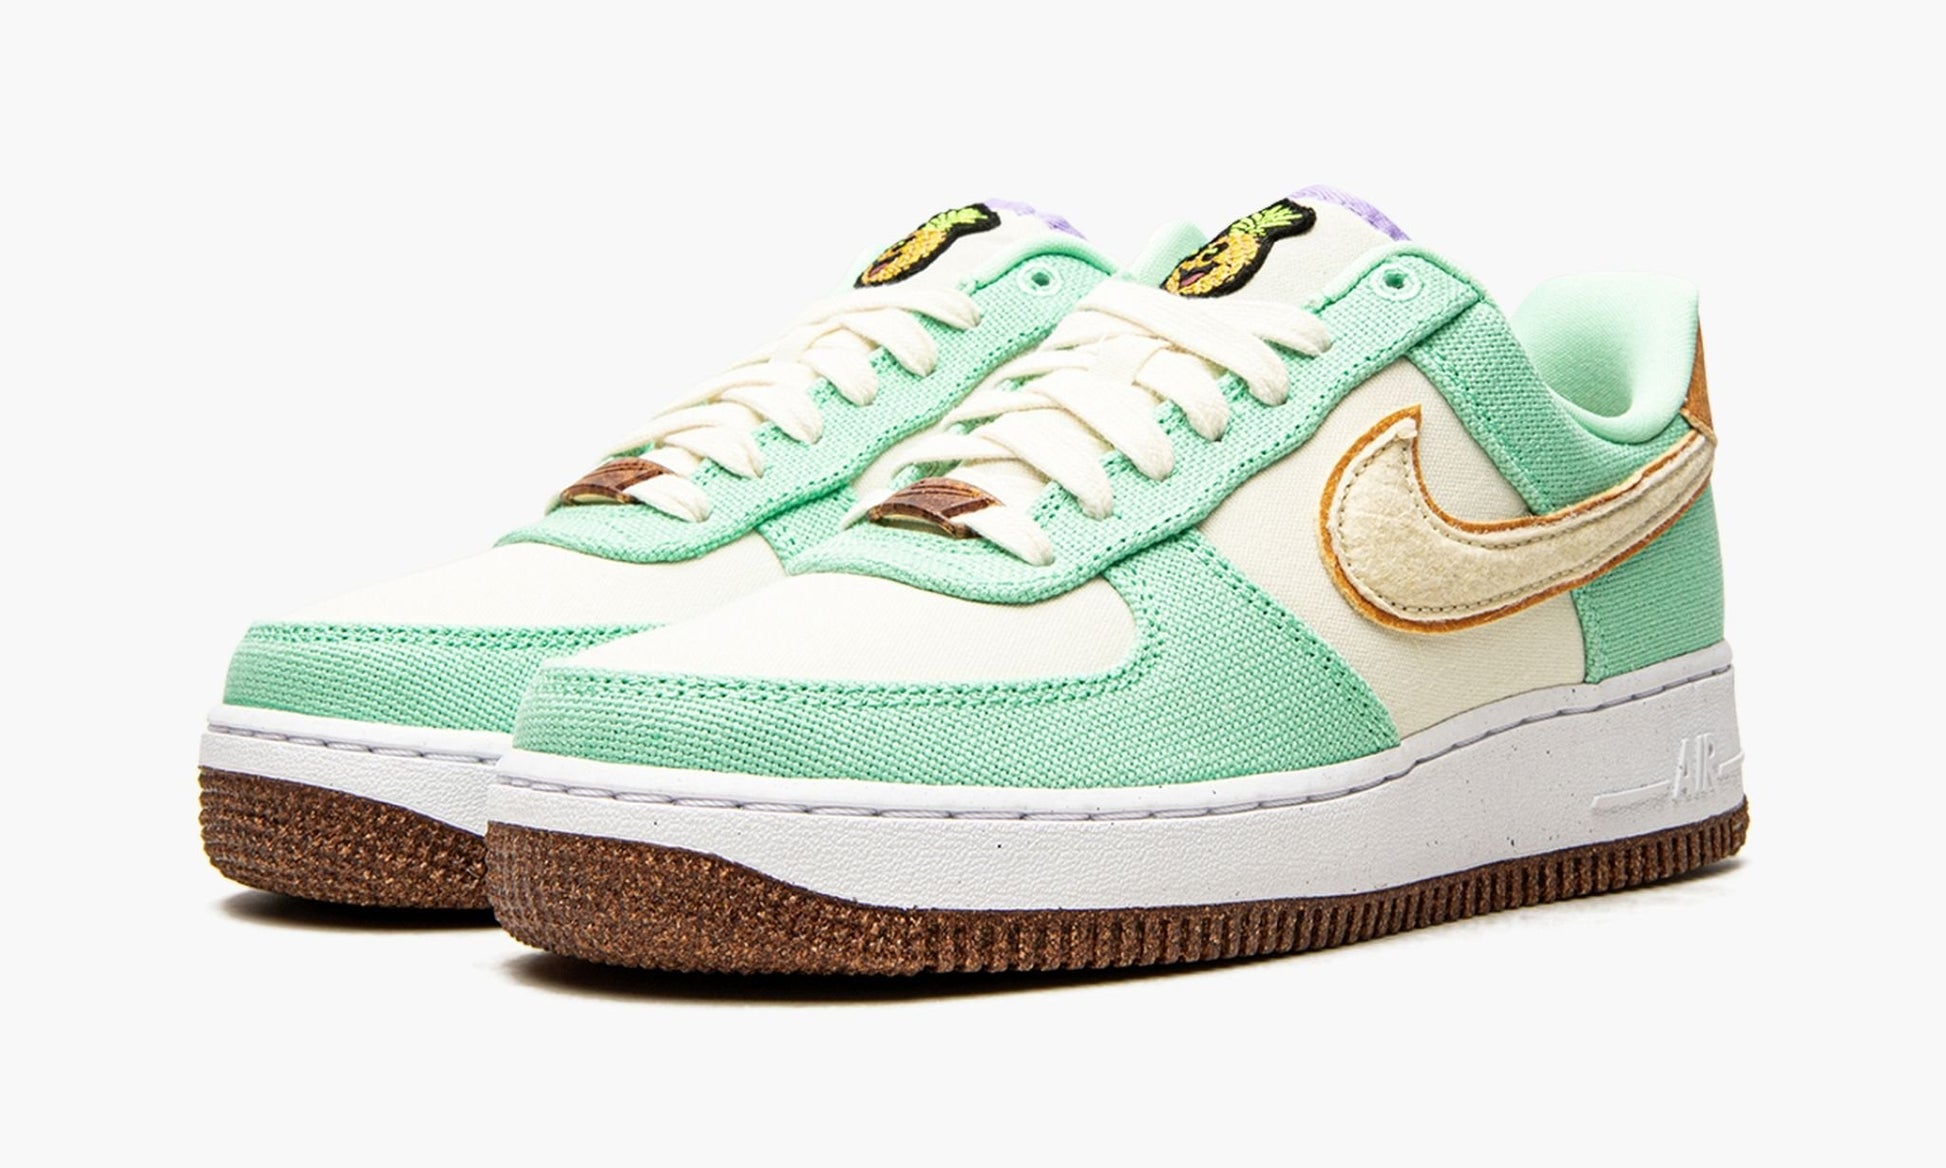 WMNS Air Force 1 Low "Happy Pineapple"